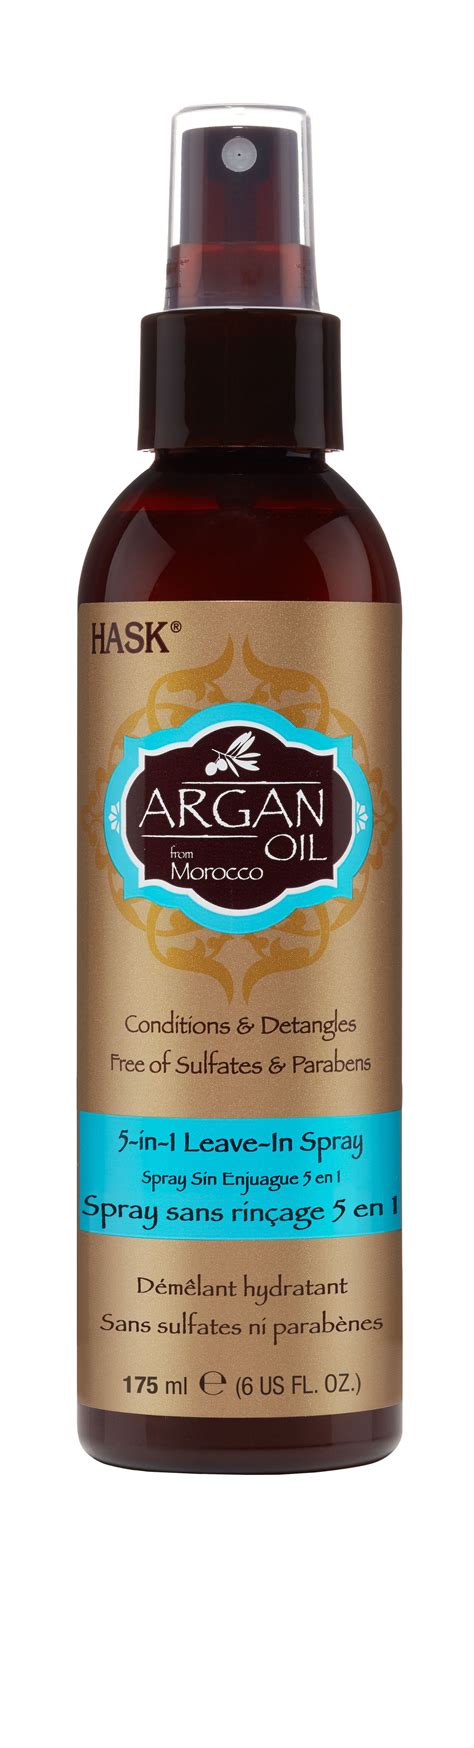 Hask Repairing With Pure Organic Argan Oil From Morocco Sulfate Free 5